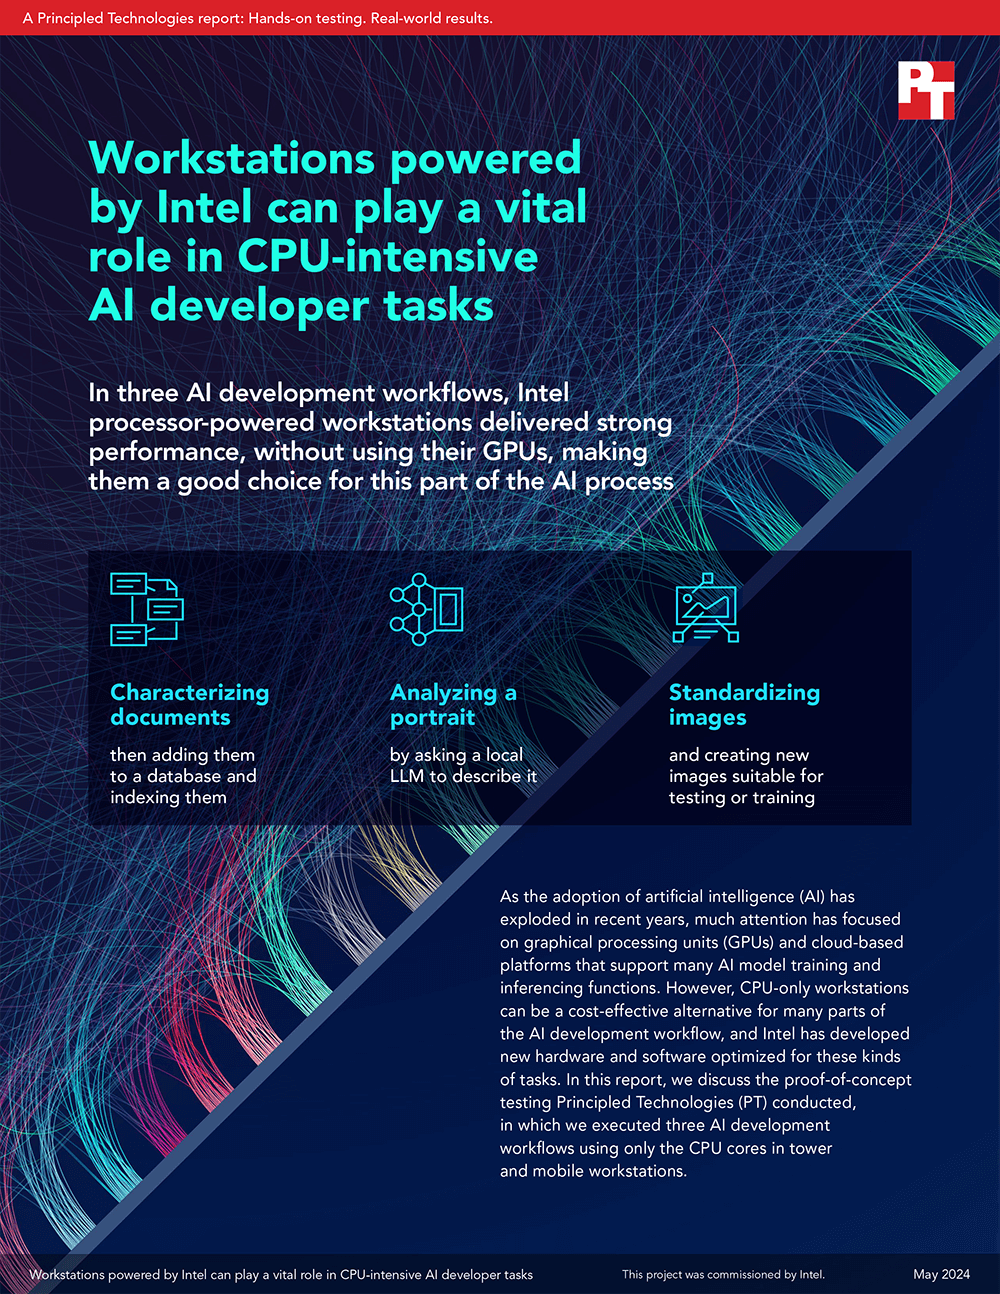 New Principled Technologies Study Demonstrates How Workstations Featuring Intel Processors Can be a Strong Choice for CPU-Intensive AI Developer Tasks